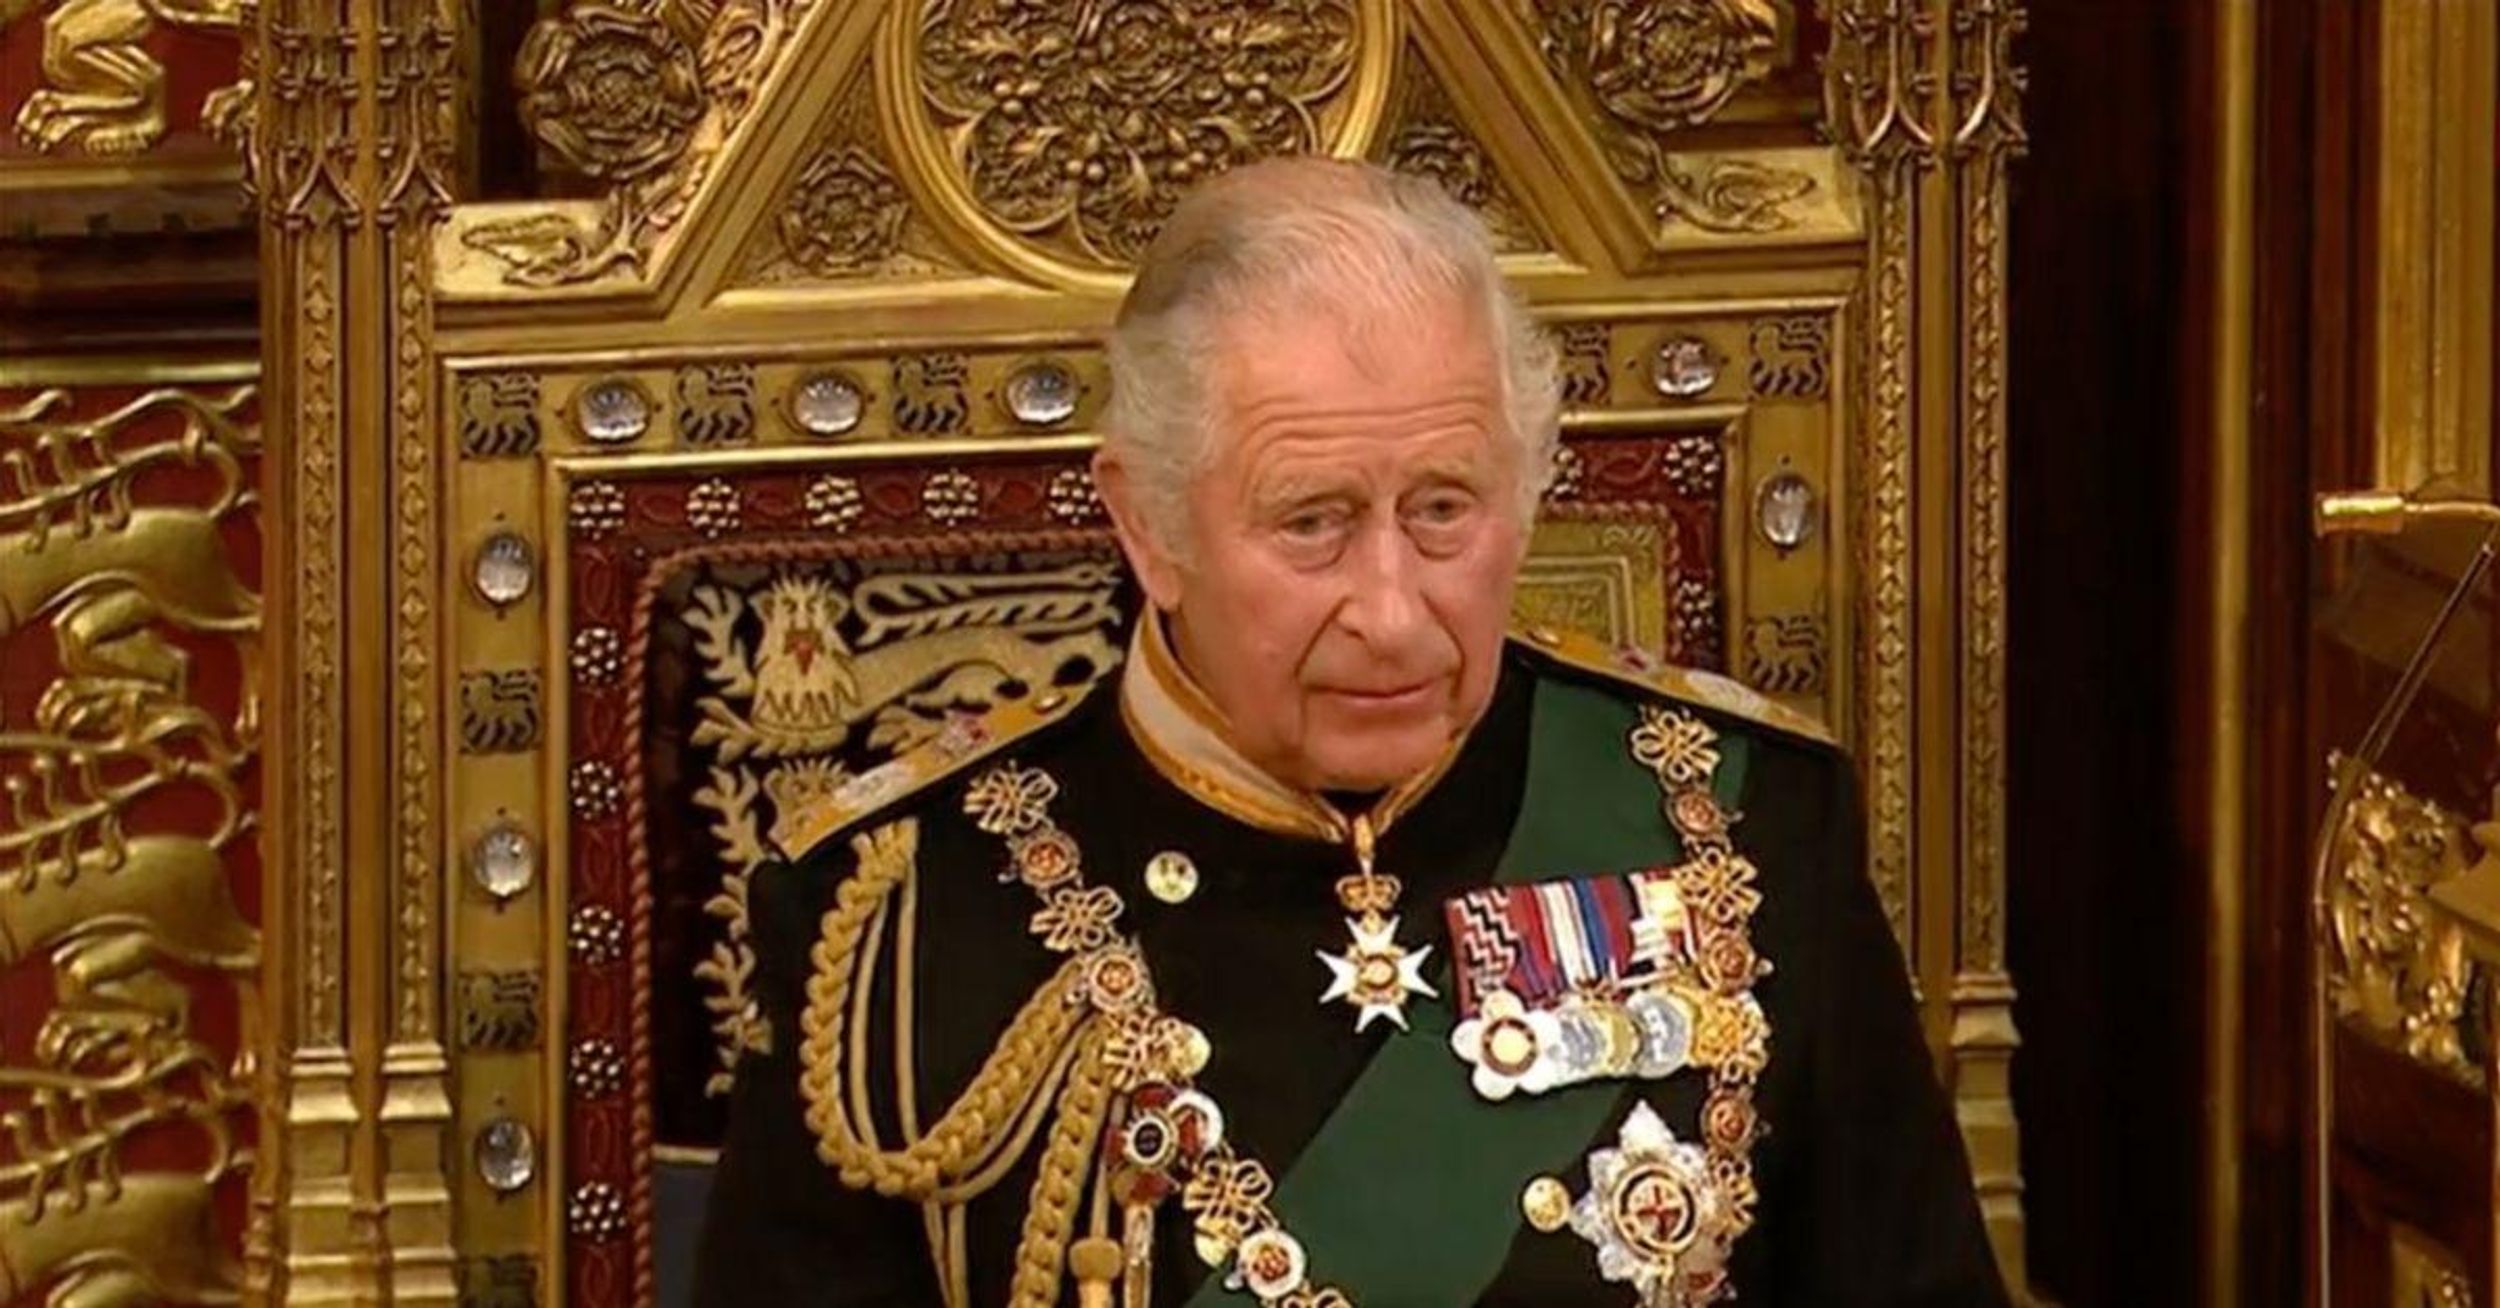 Prince Charles Laments The Rising 'Cost-Of-Living' While Literally Sitting On A Golden Throne—And Twitter Cannot